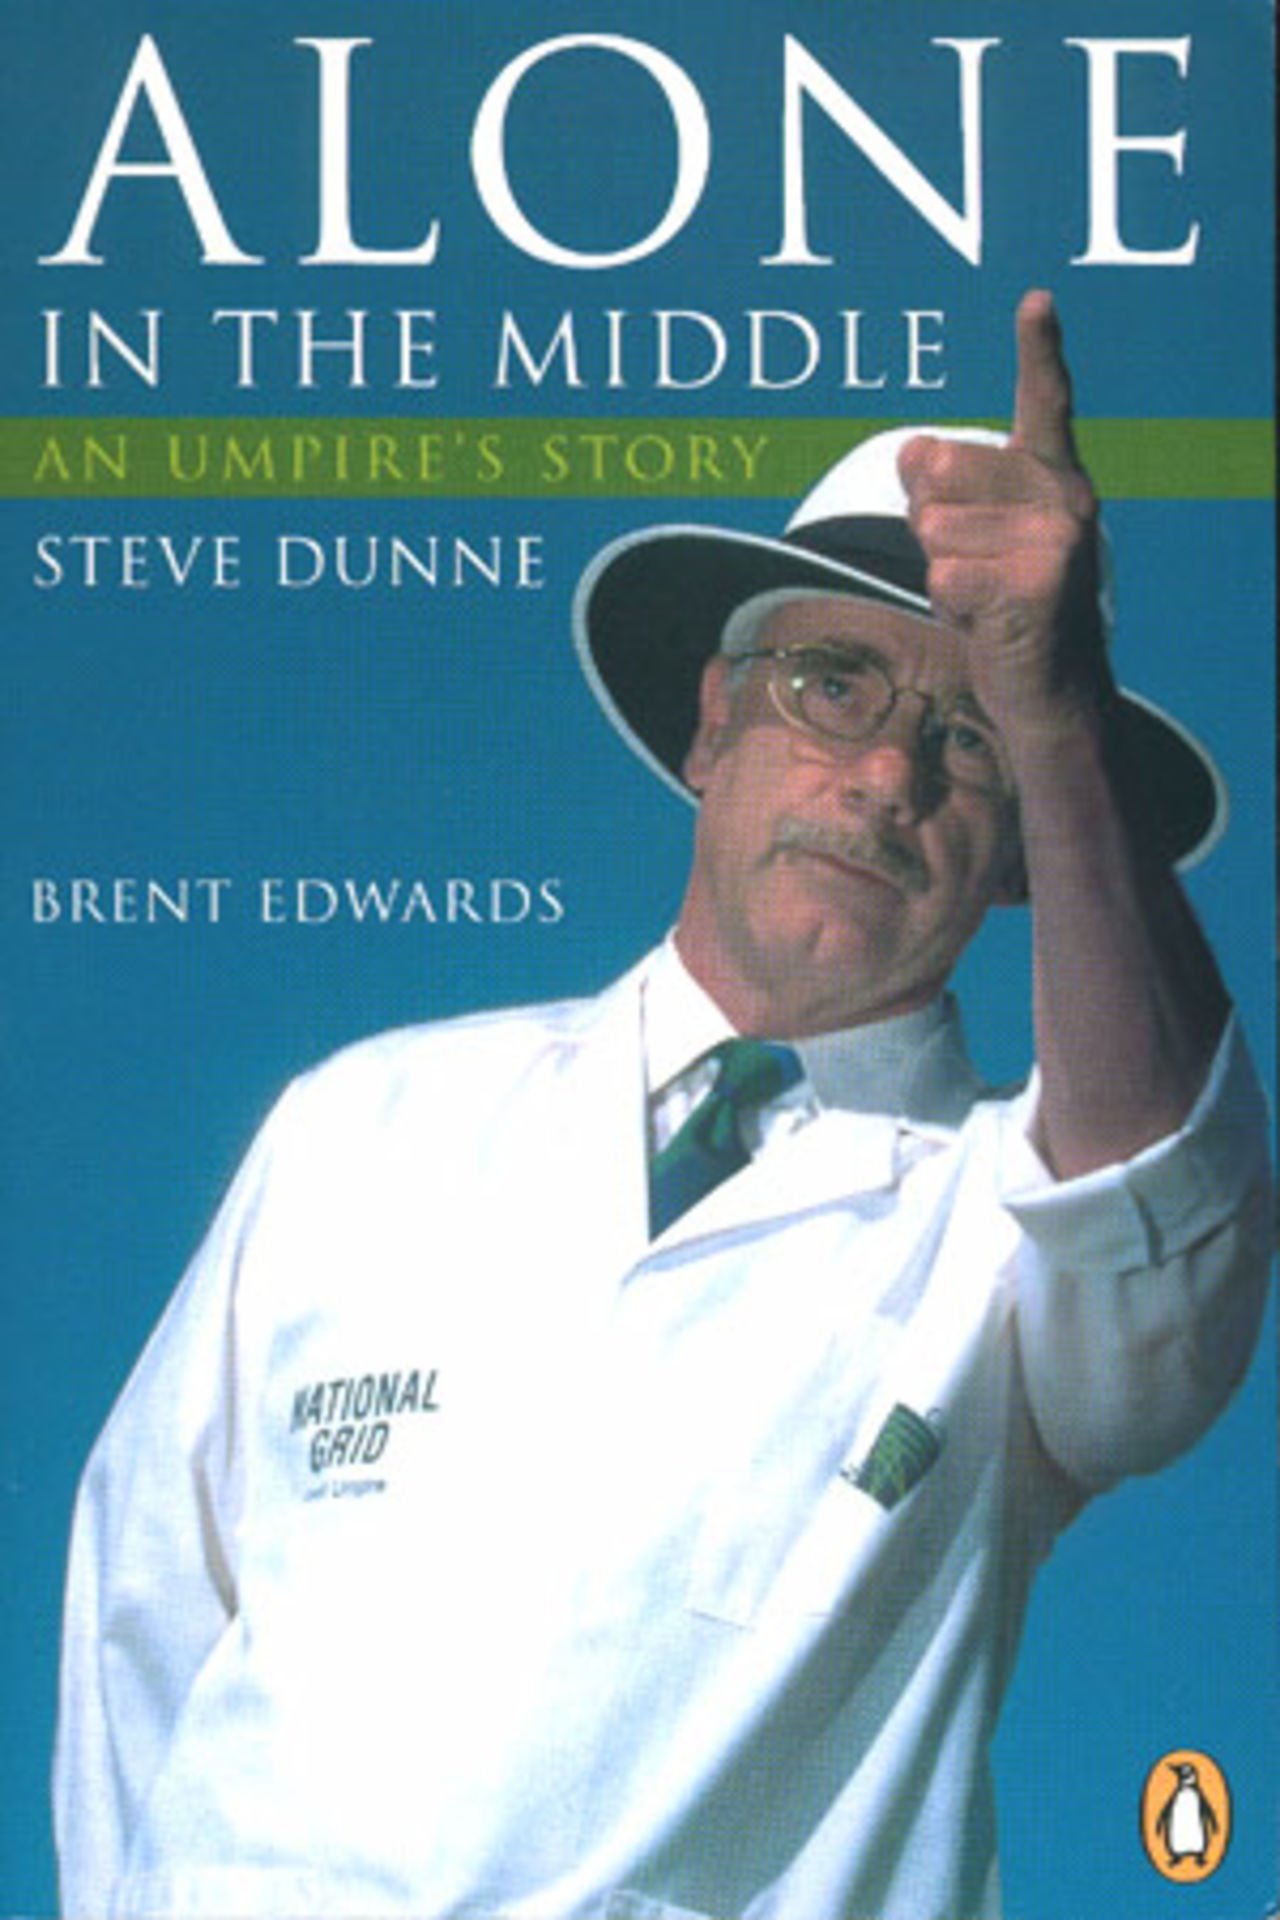 Cover of book 'Alone in the Middle - An Umpire's Story - Steve Dunne' by Brent Edwards.